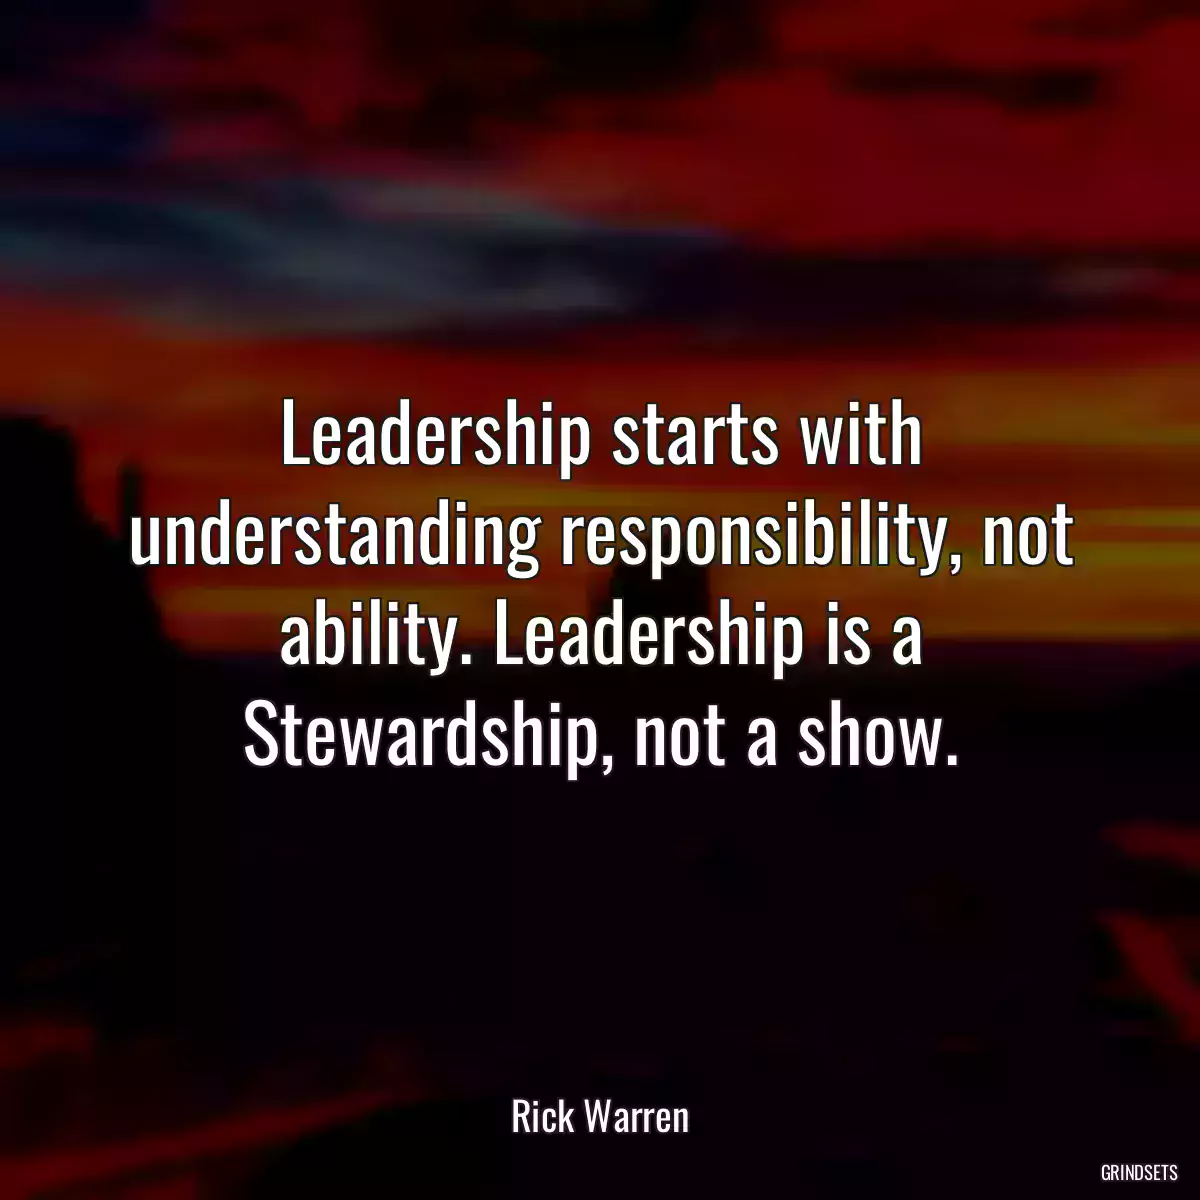 Leadership starts with understanding responsibility, not ability. Leadership is a Stewardship, not a show.